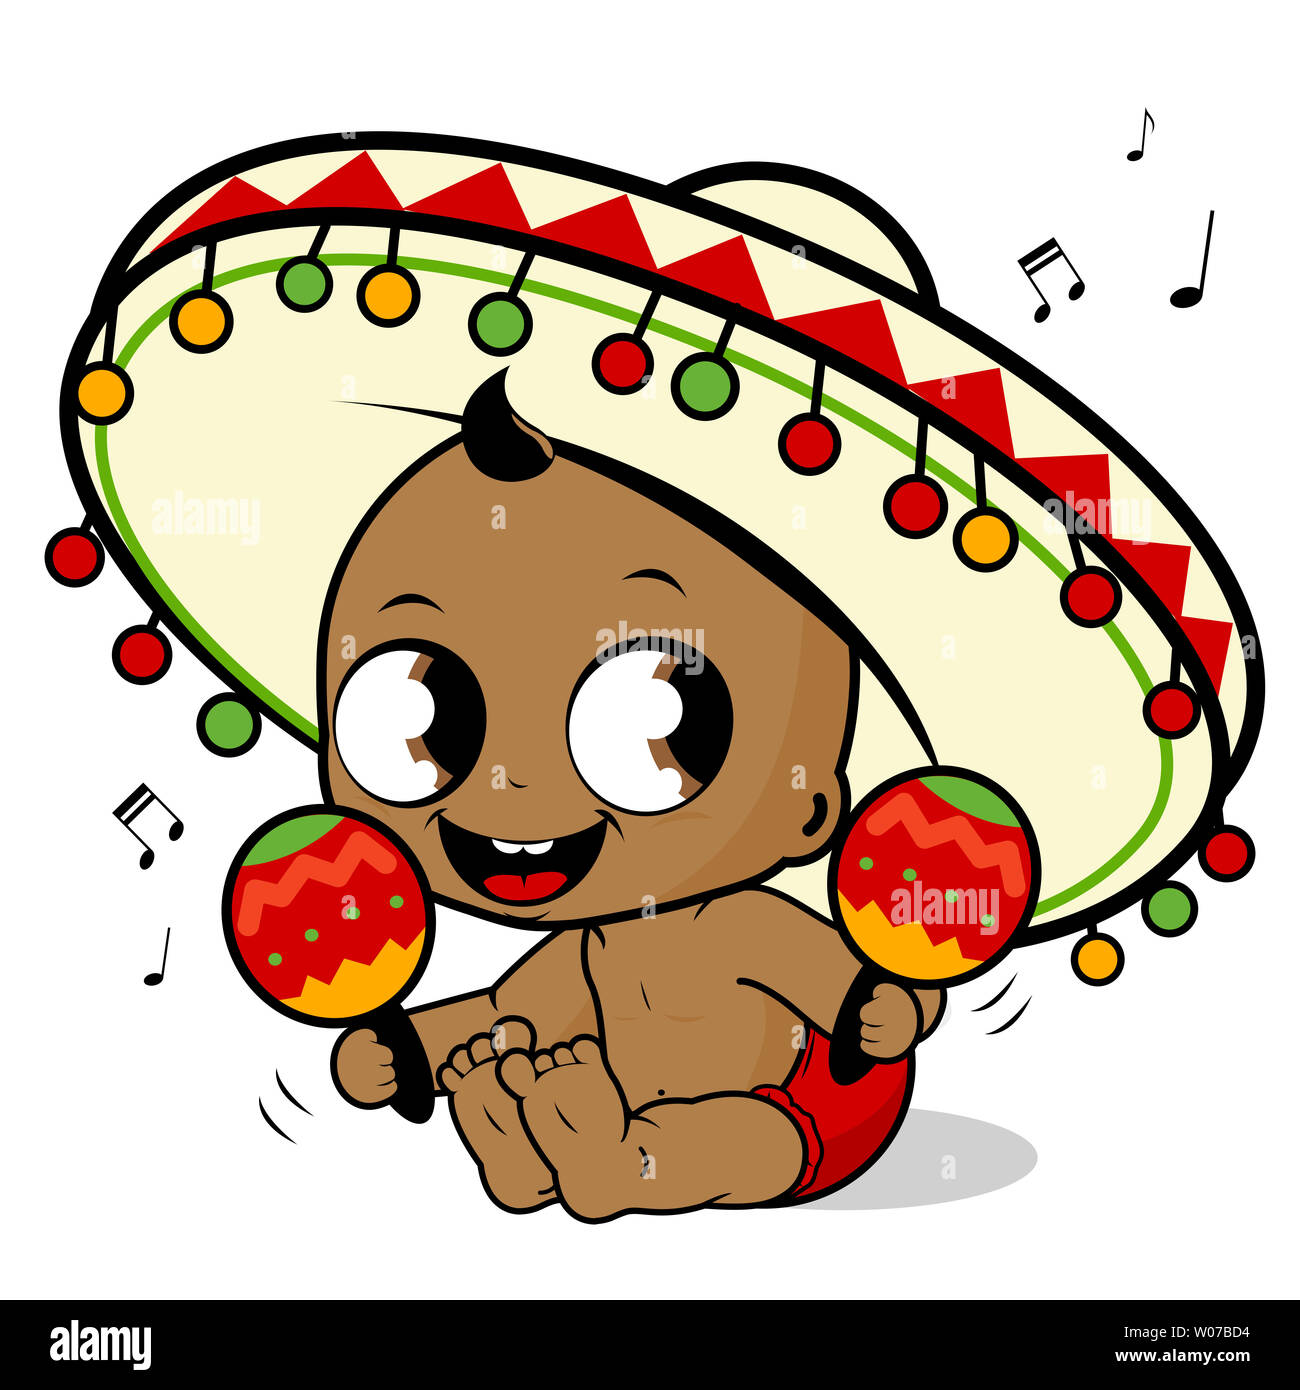 Illustration of a happy mariachi baby boy playing the maracas and singing. Stock Photo